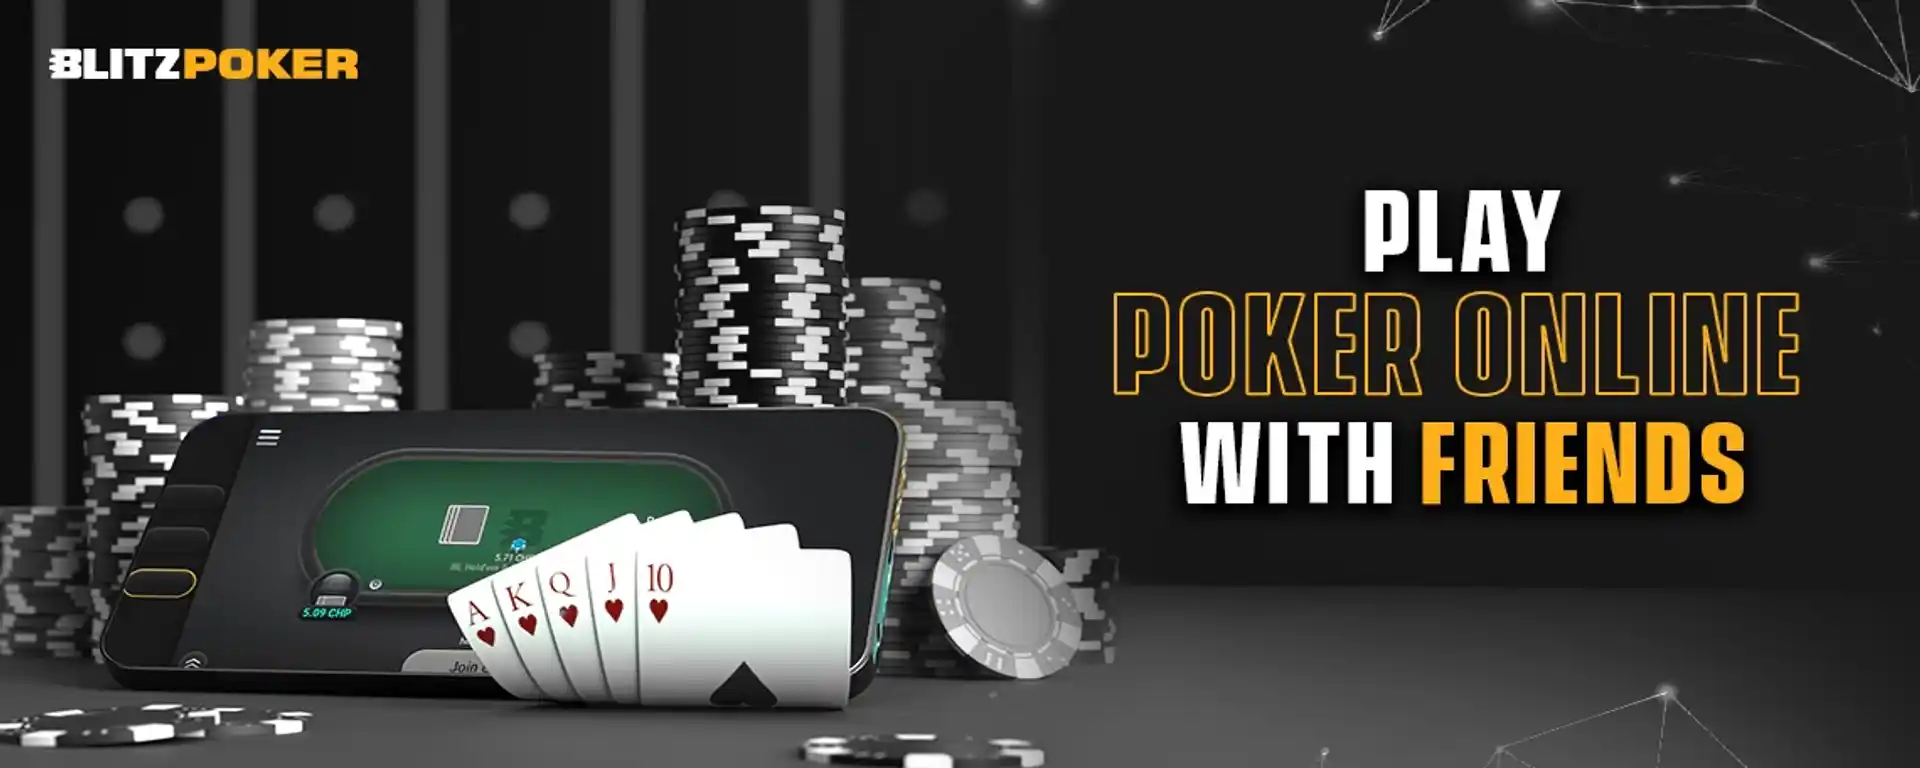 Play Poker Online with Friends for Money